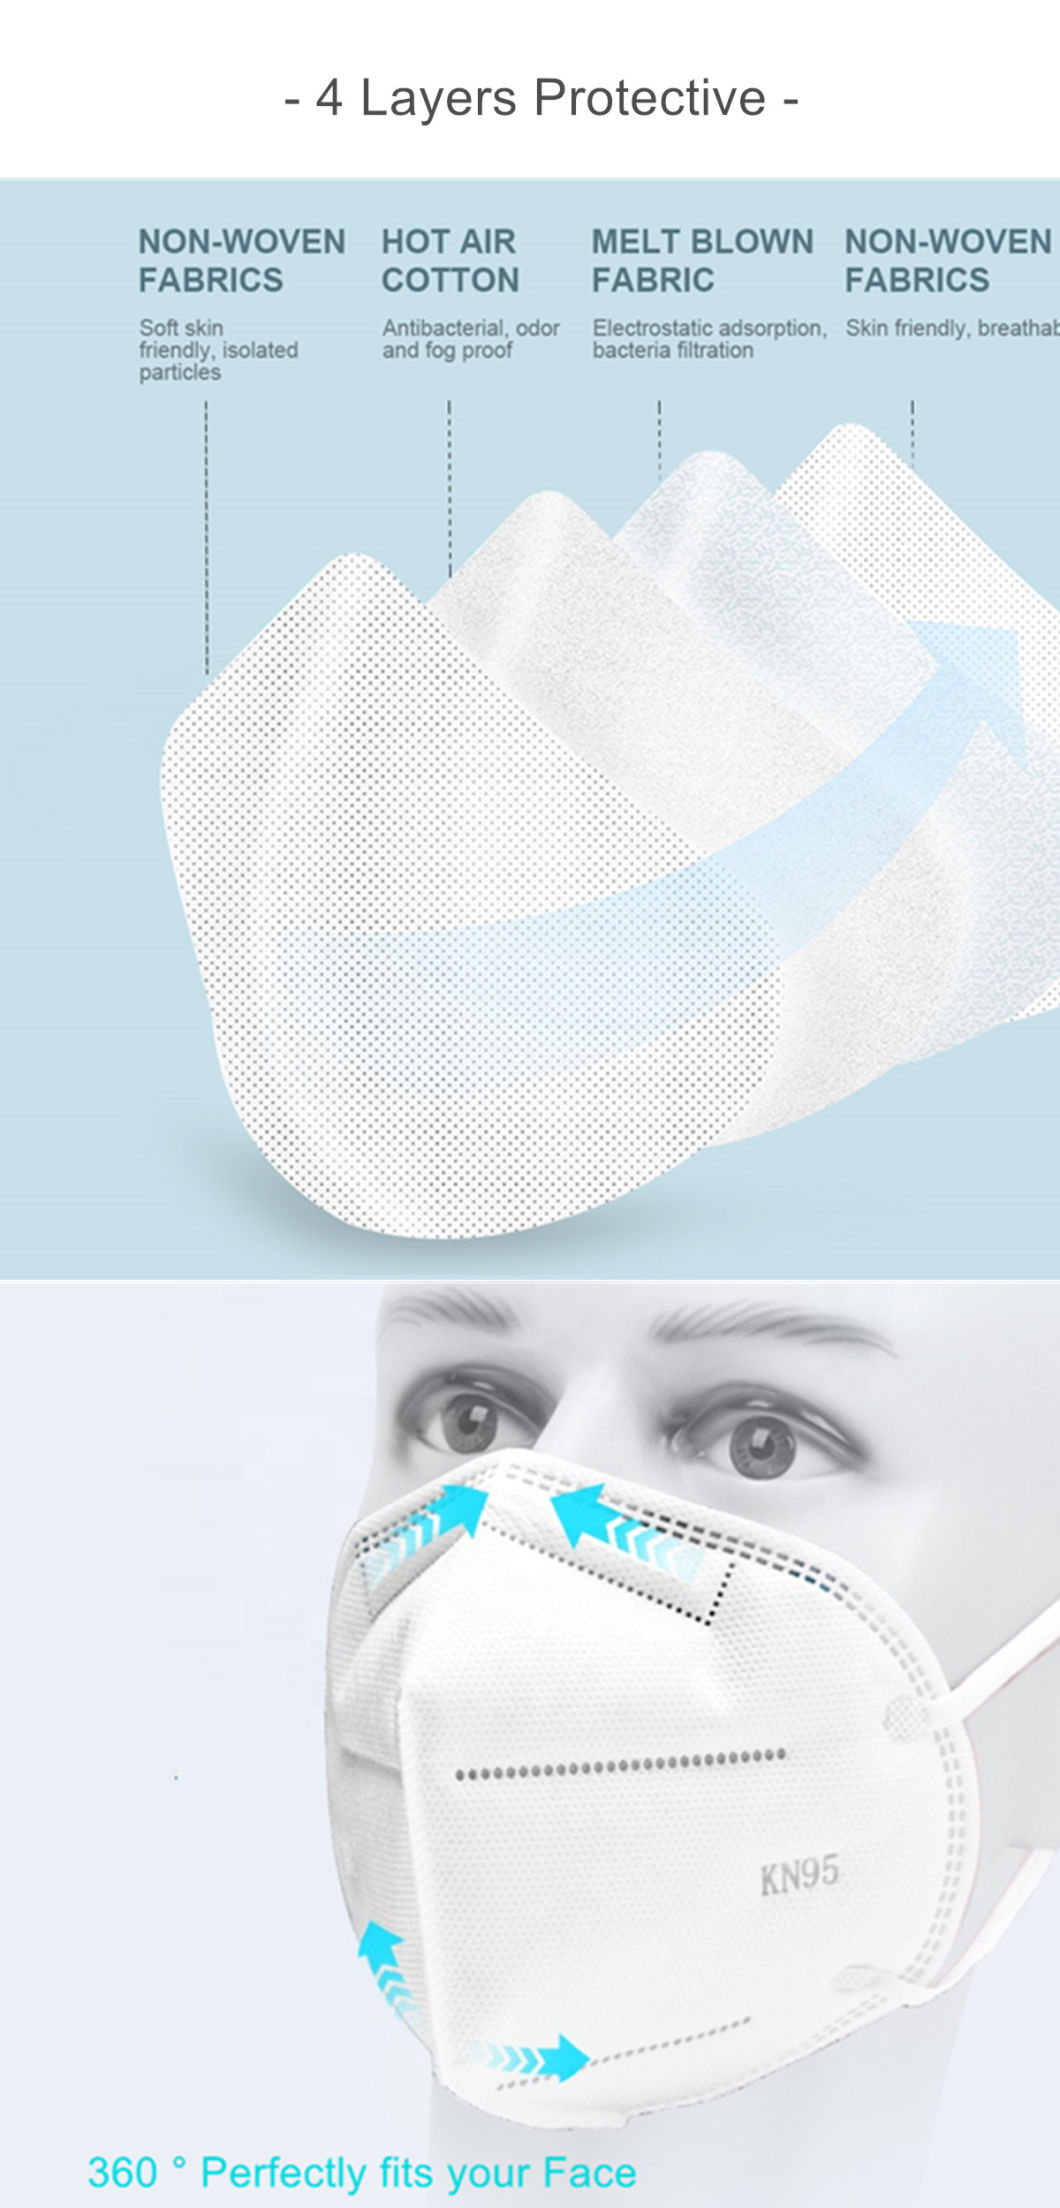 Hot Sale Ce Approved FFP3 8210 Mask Anti-Dust Anti-Haze Disposable Non-Woven Fabric Filter Face Mask